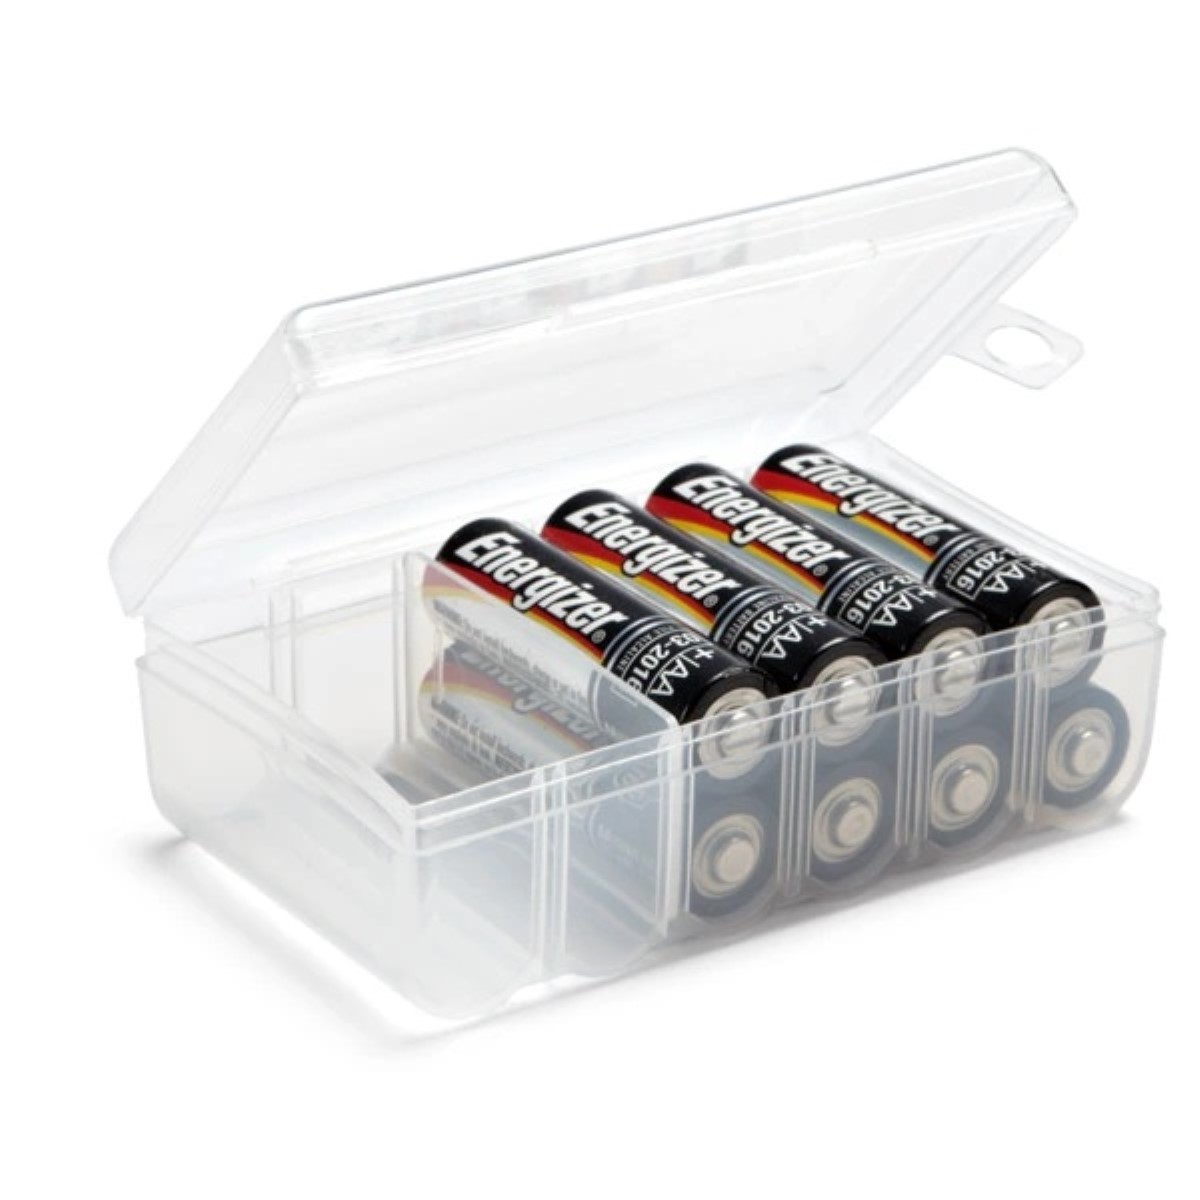 How To Store 18650 Batteries